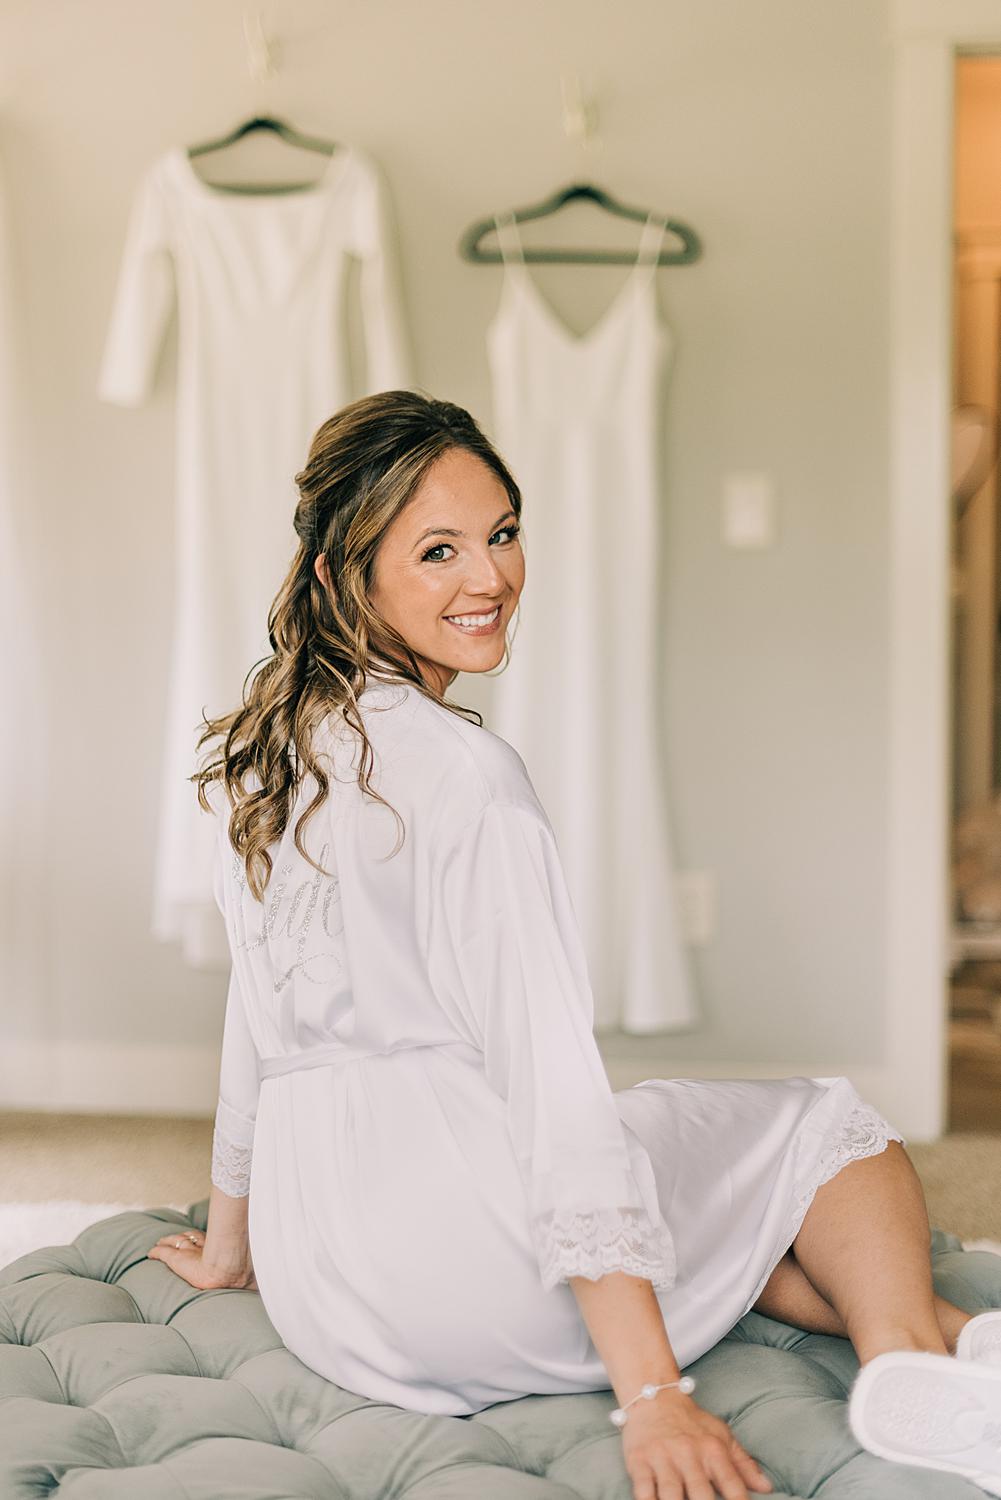 Bride poses for wedding photographers with her two wedding gowns hanging in the background